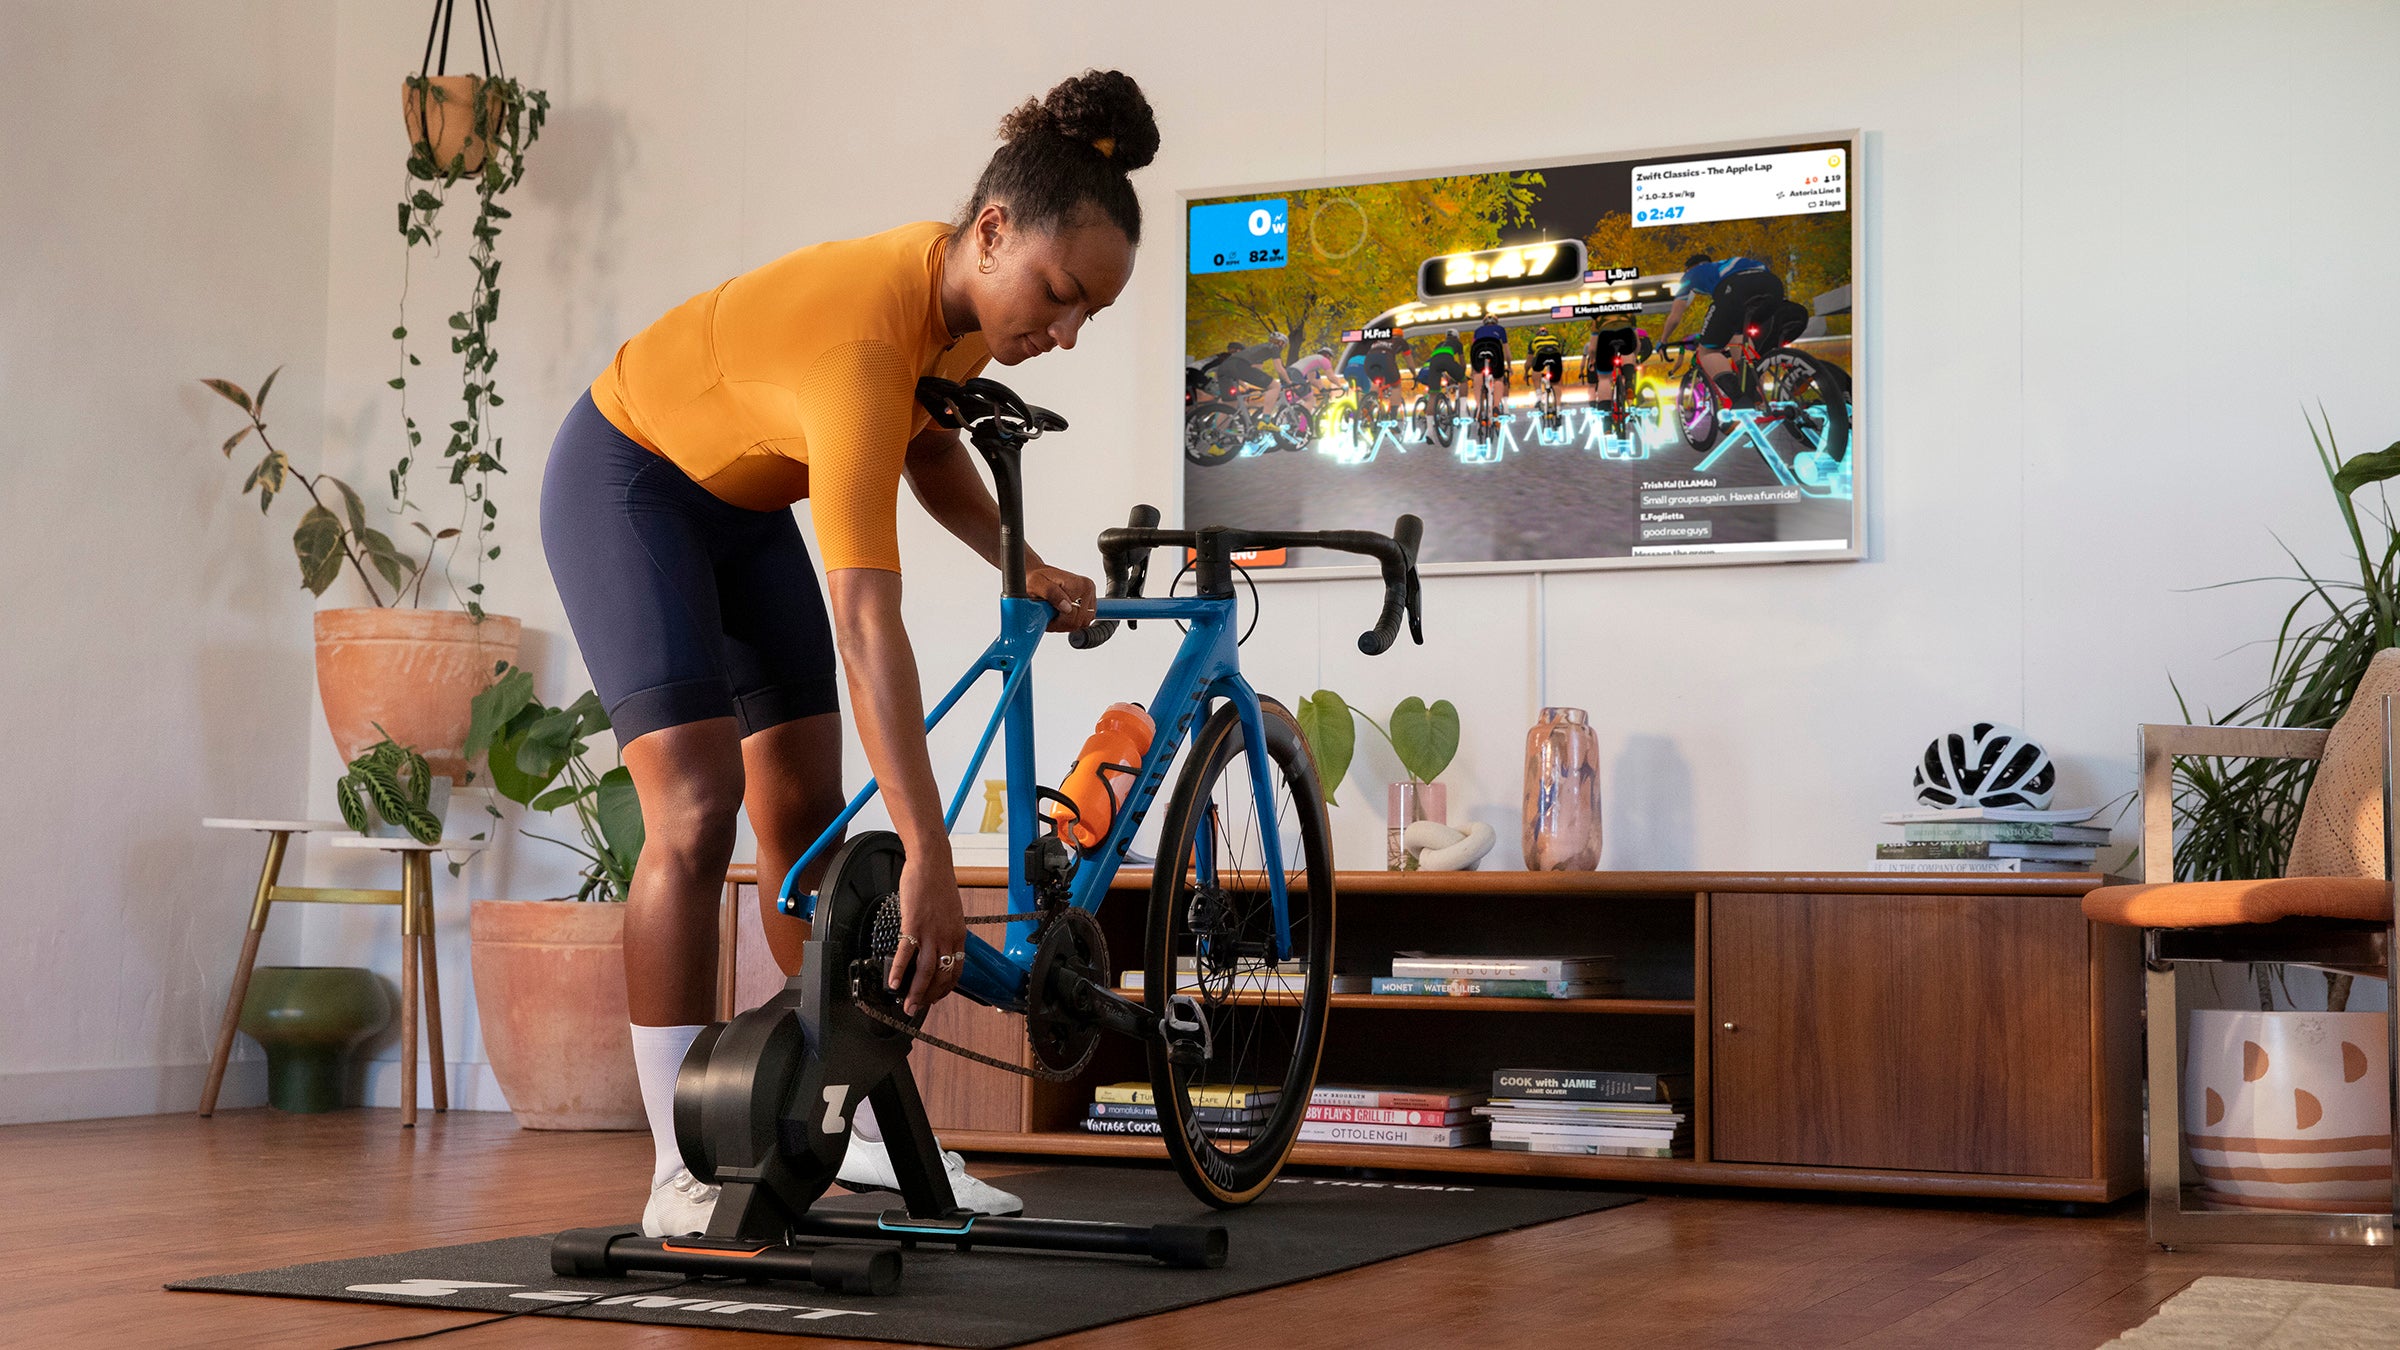 Video: Zwift - indoor cycling for everyone! - Mythos E-Bike